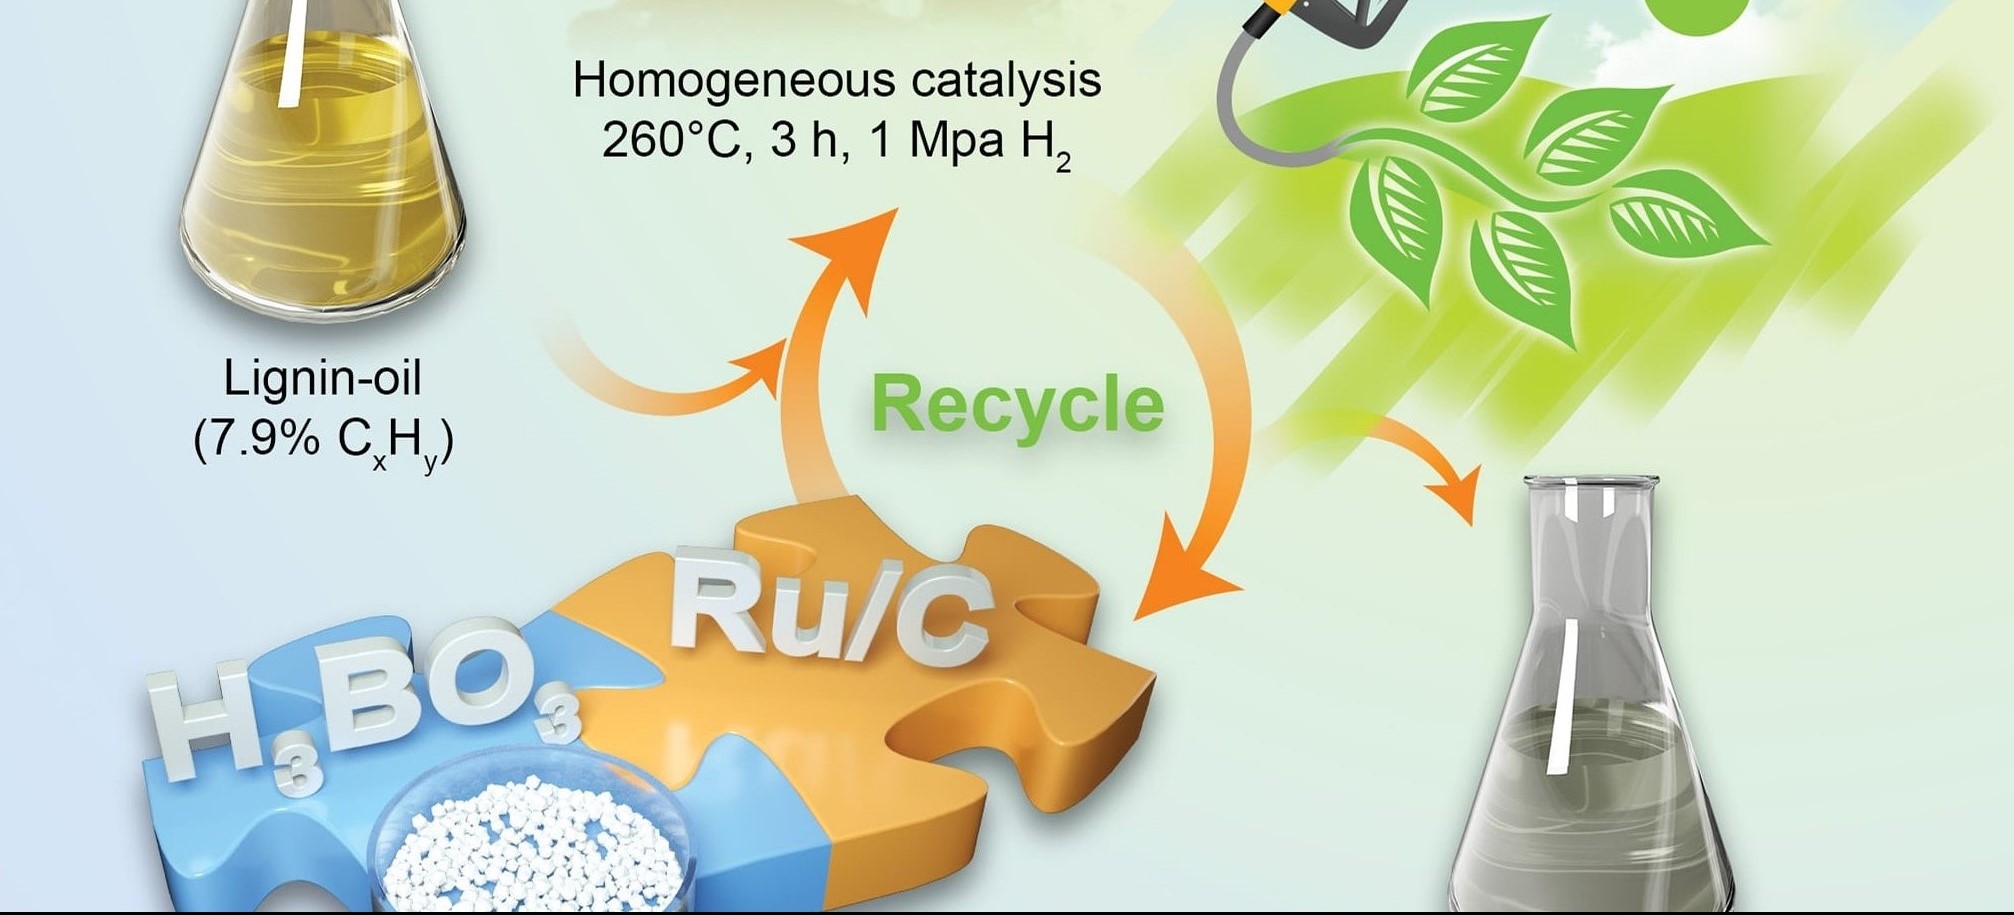 Boric Acid as a Novel Homogeneous Catalyst Coupled with Ru/C for Hydrodeoxygenation of Phenolic Compounds and Raw Lignin Oil